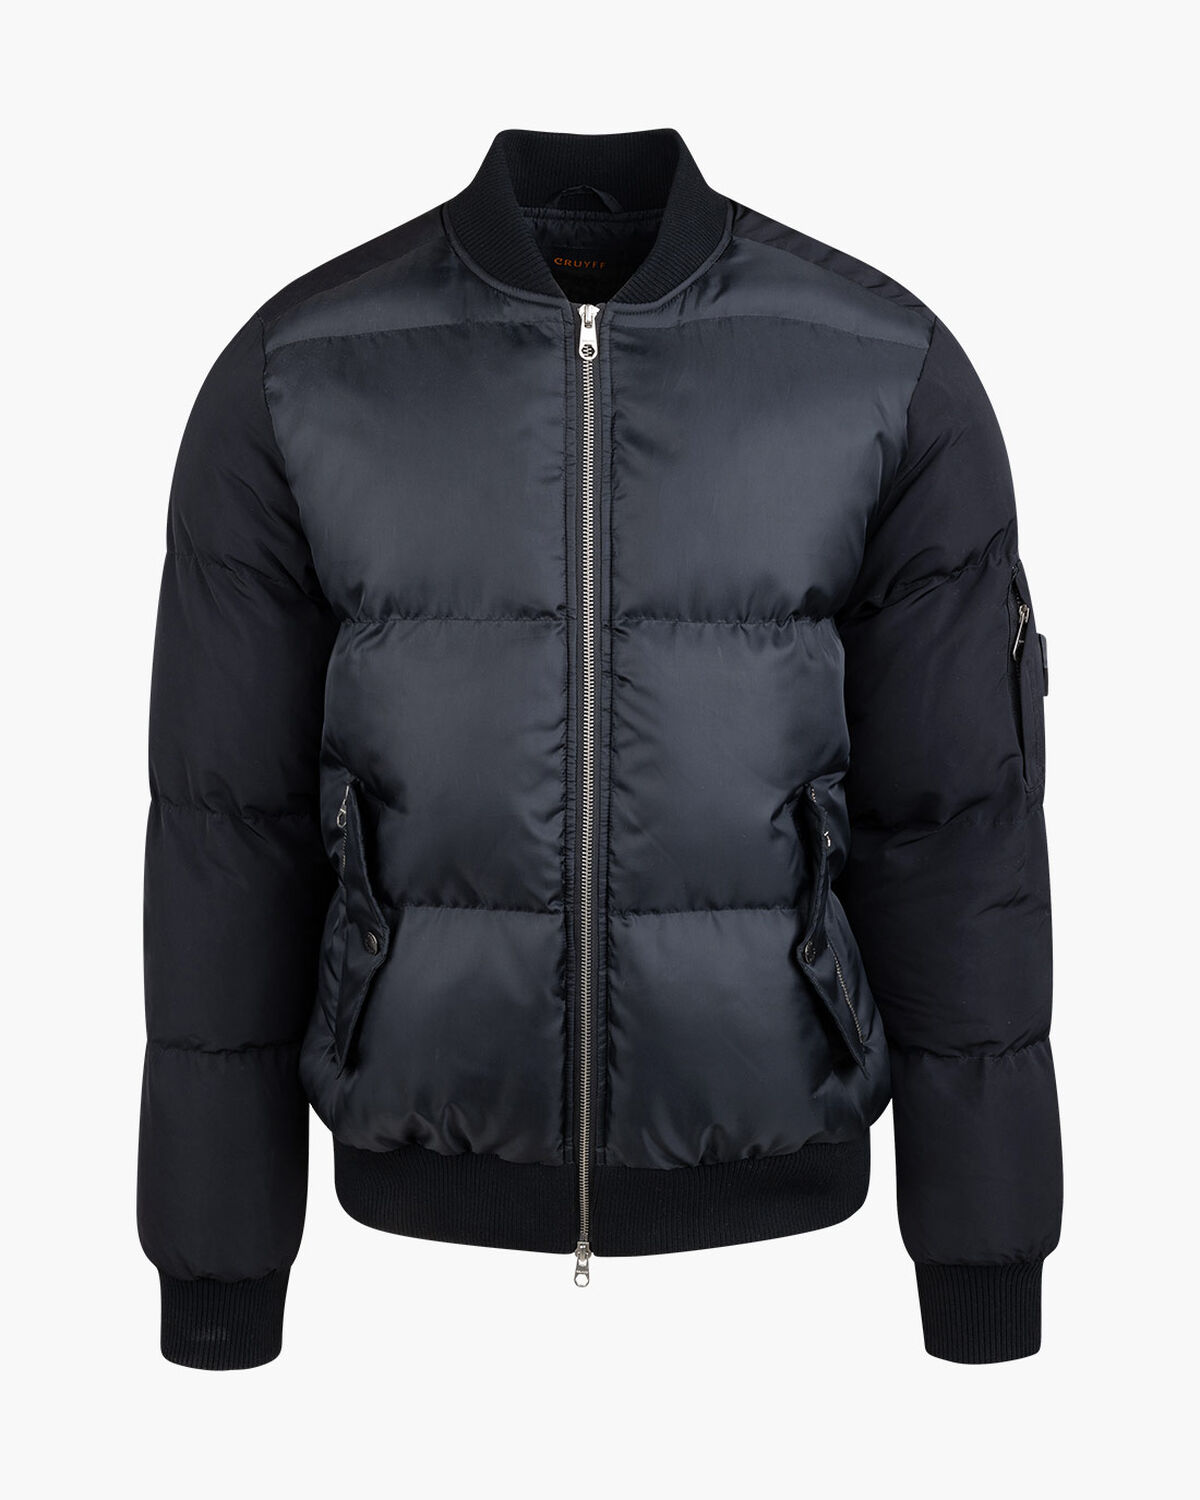 Aneto Bomber - Recycled Polyester, Black, hi-res